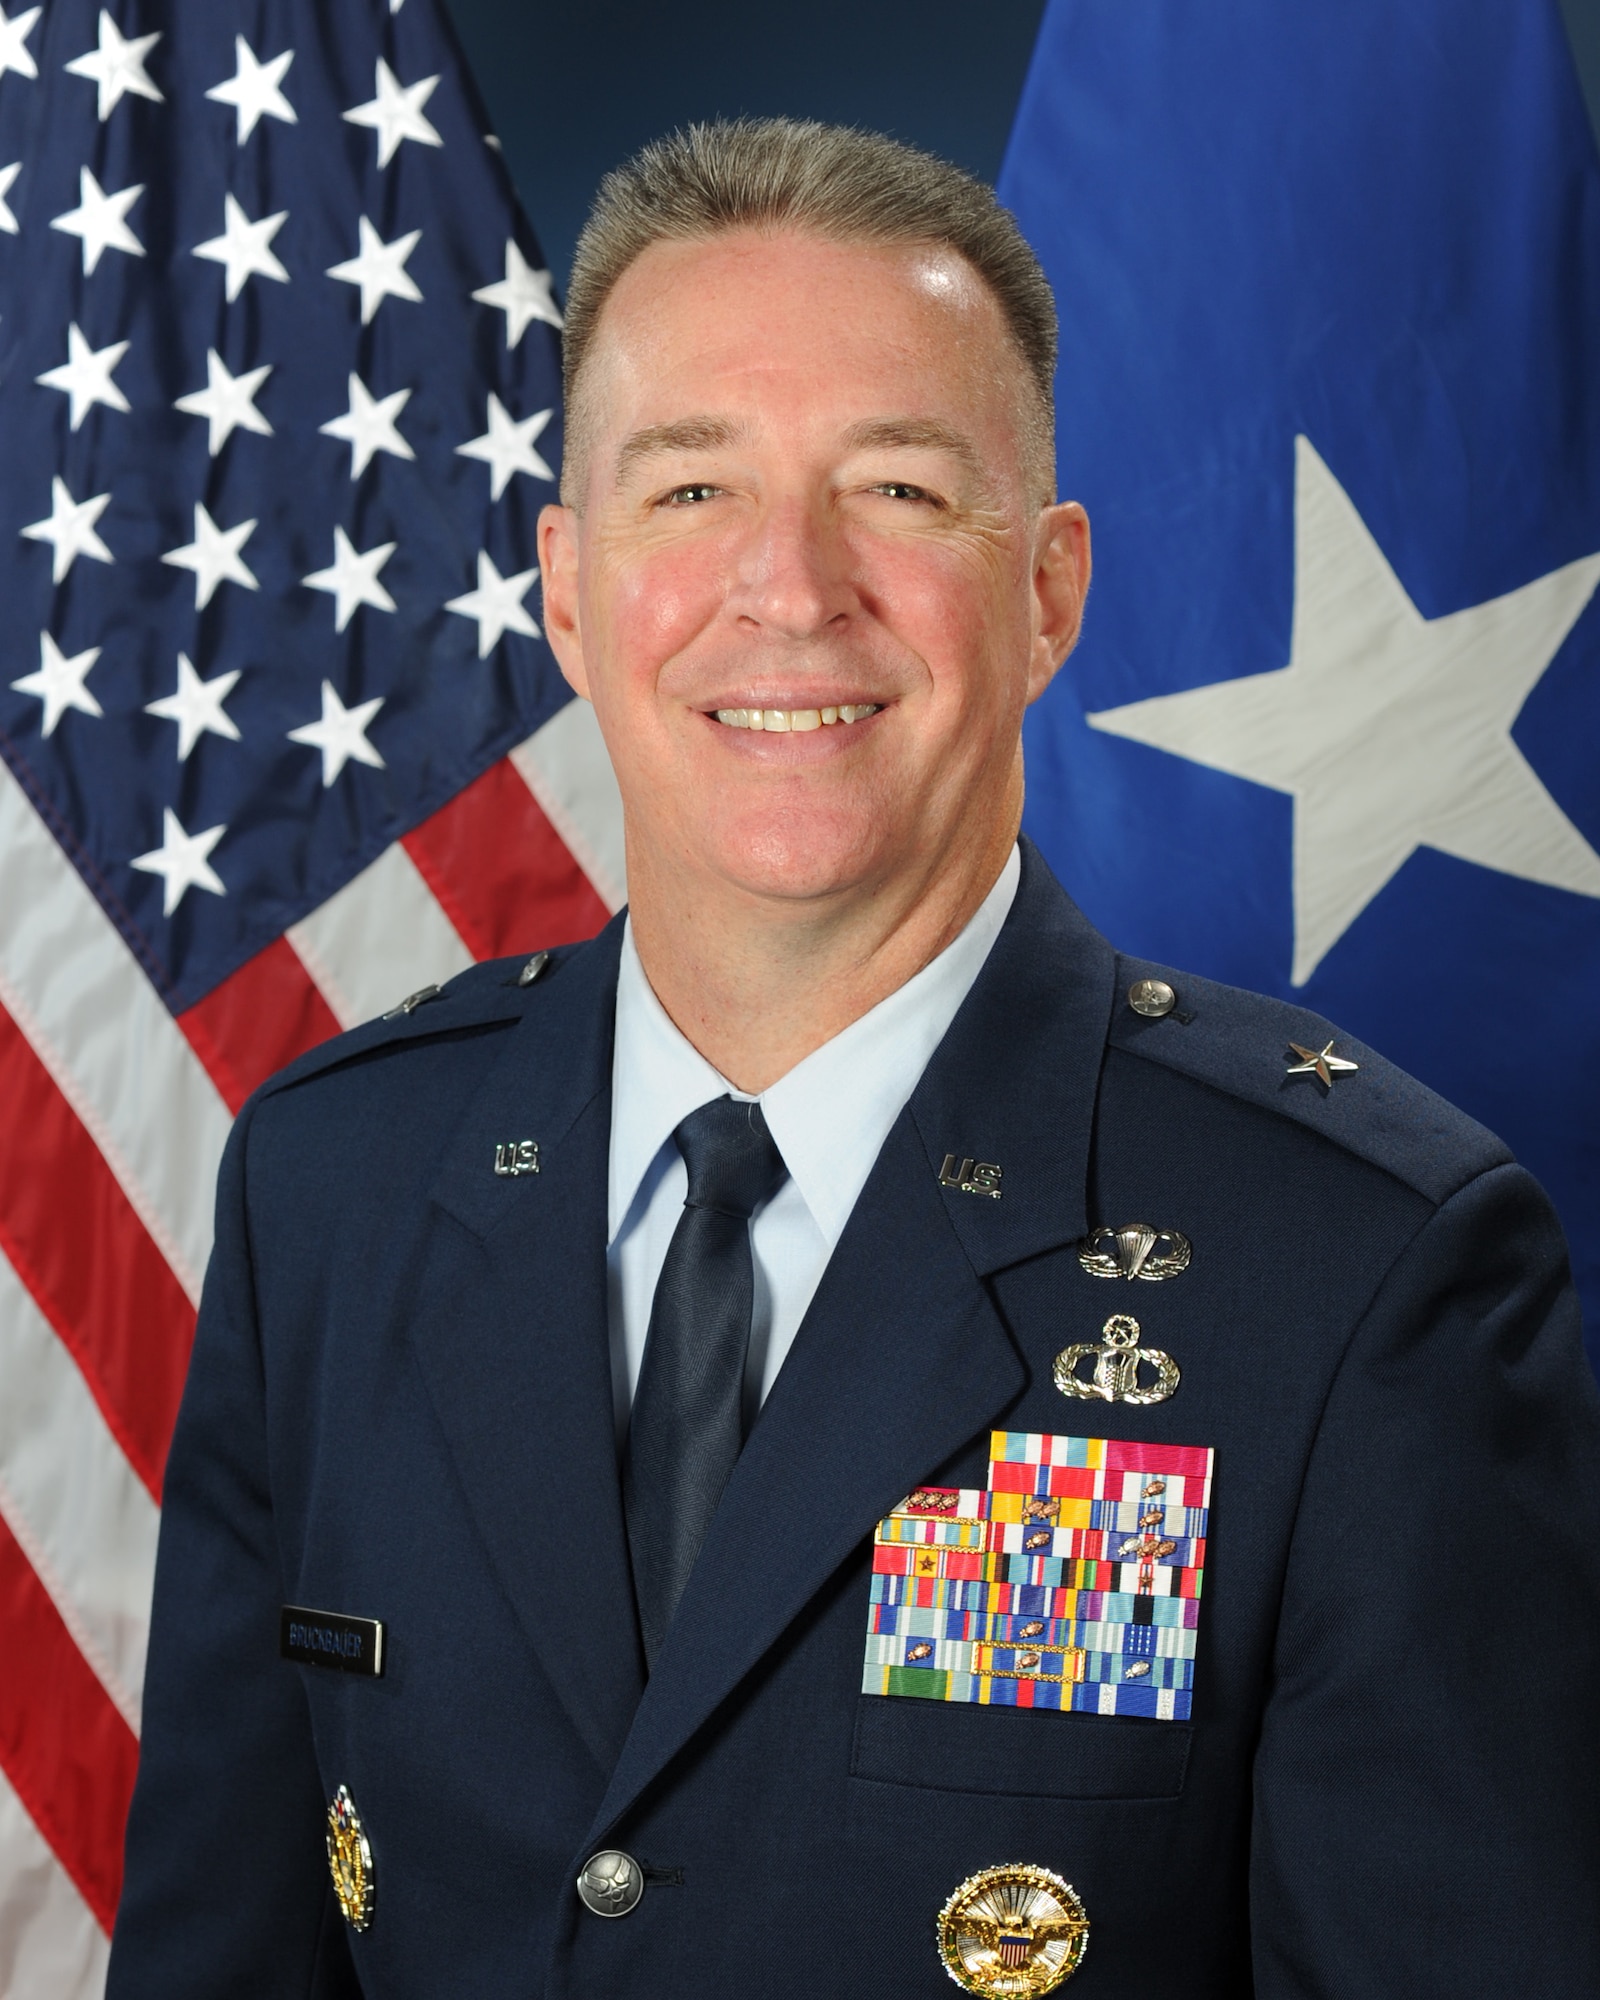 Brig. Gen. Brian Bruckbauer, Director of the  Air Force Life Cycle Management Center’s Air Force Security Assistance and Cooperation Directorate (AFSAC).